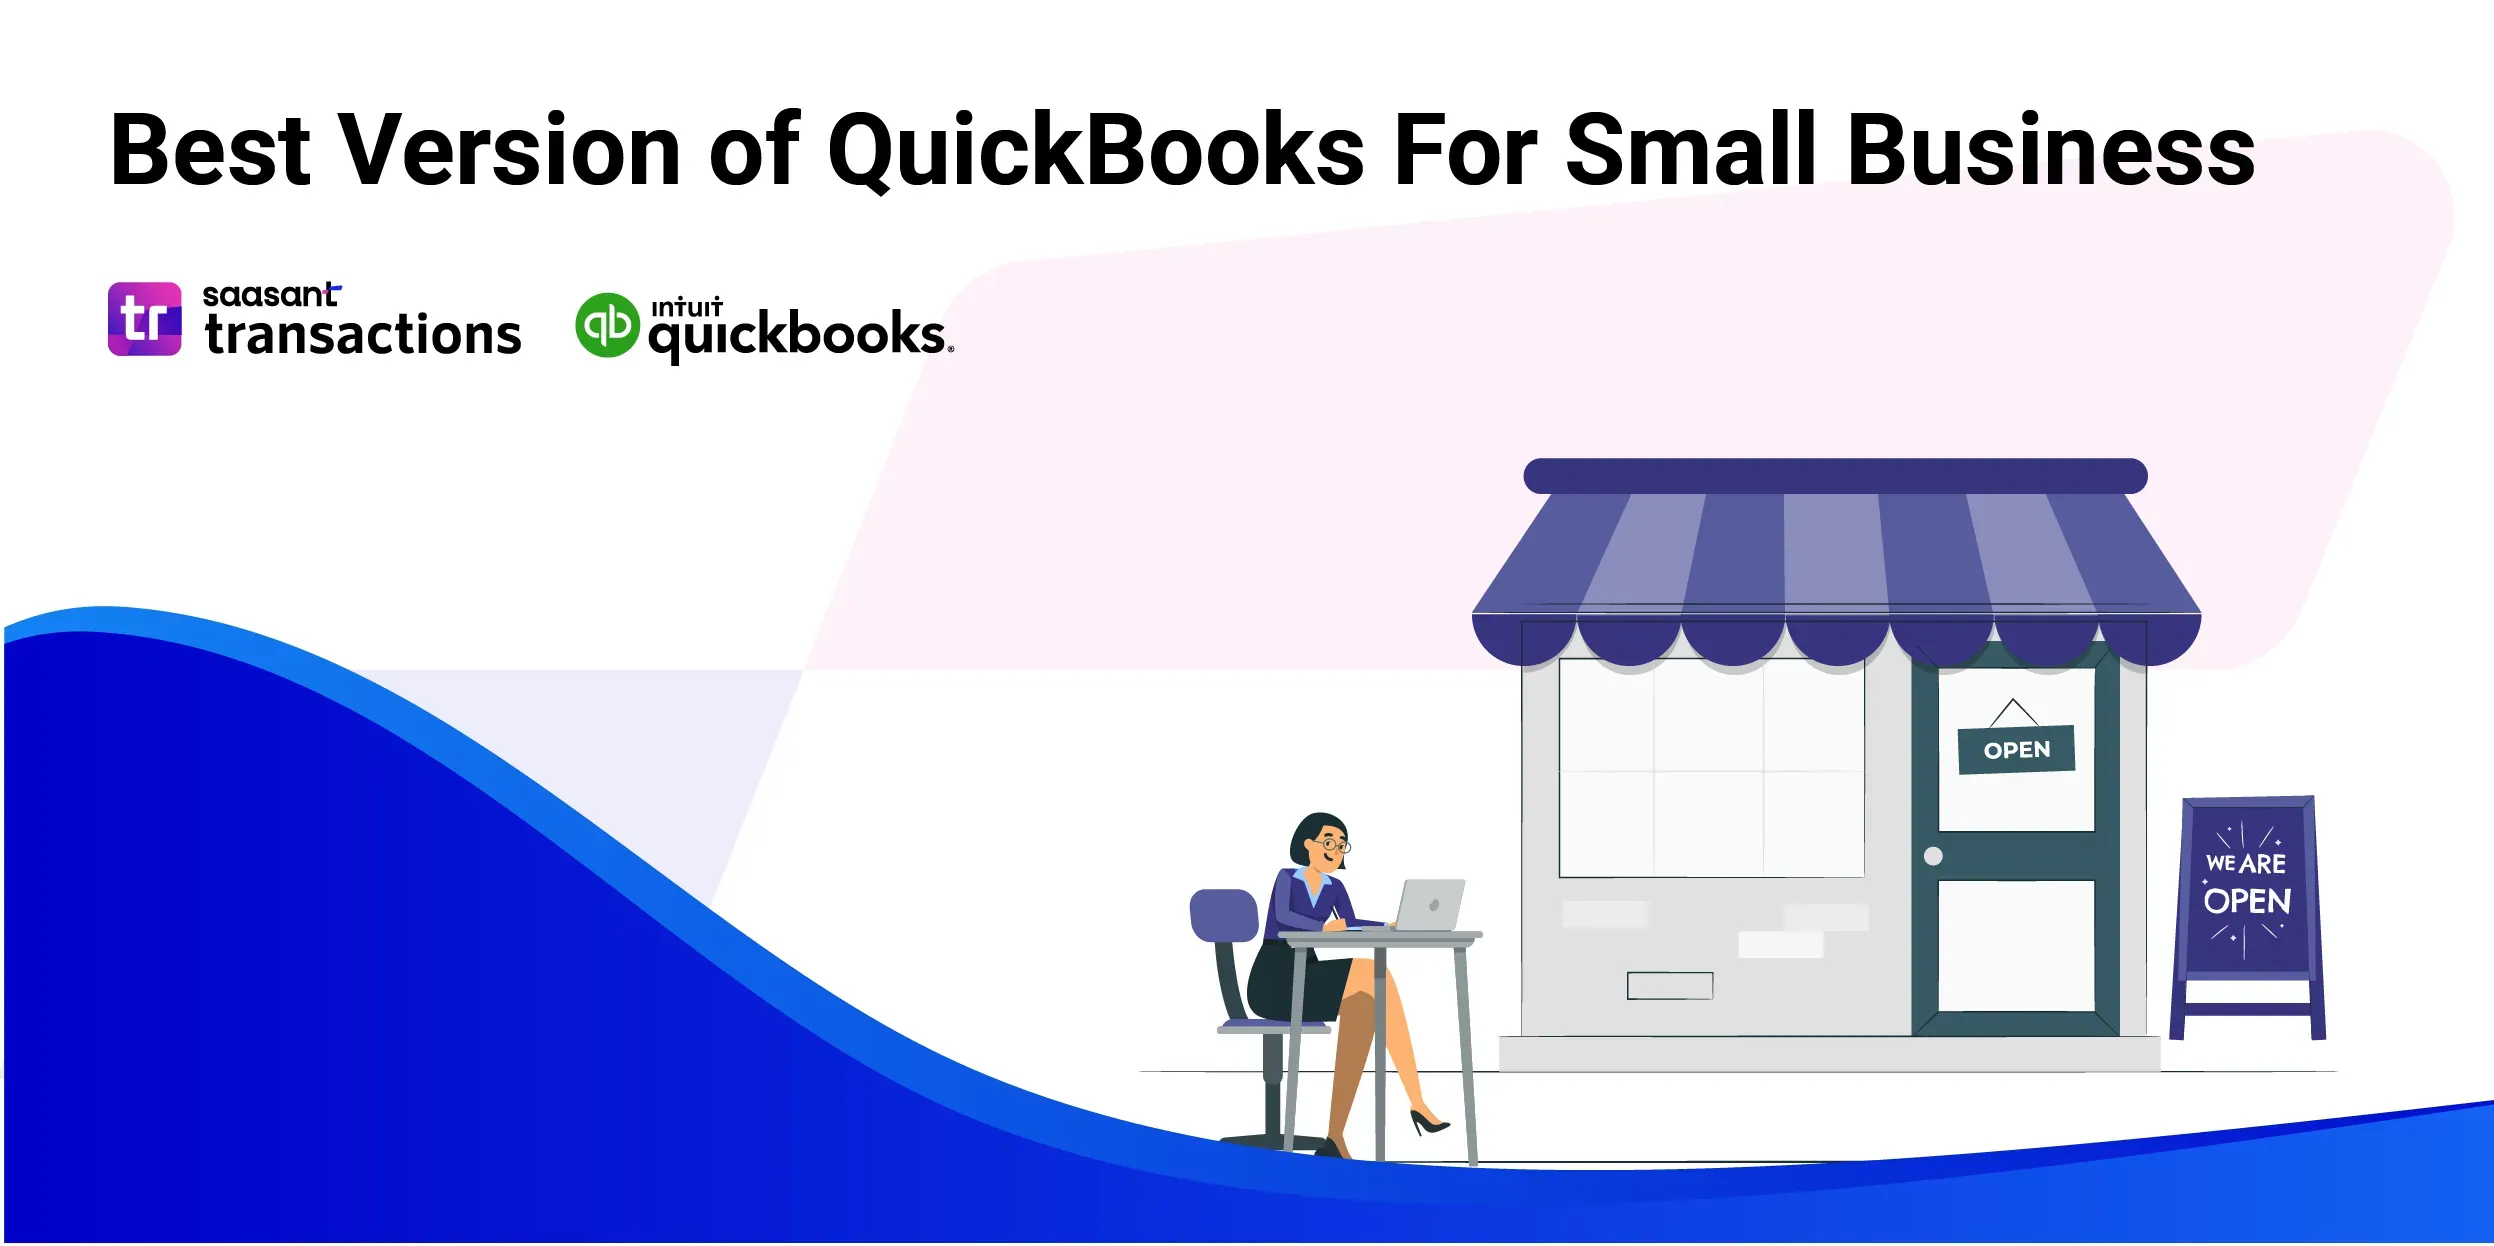 How to choose the best version of QuickBooks for small business